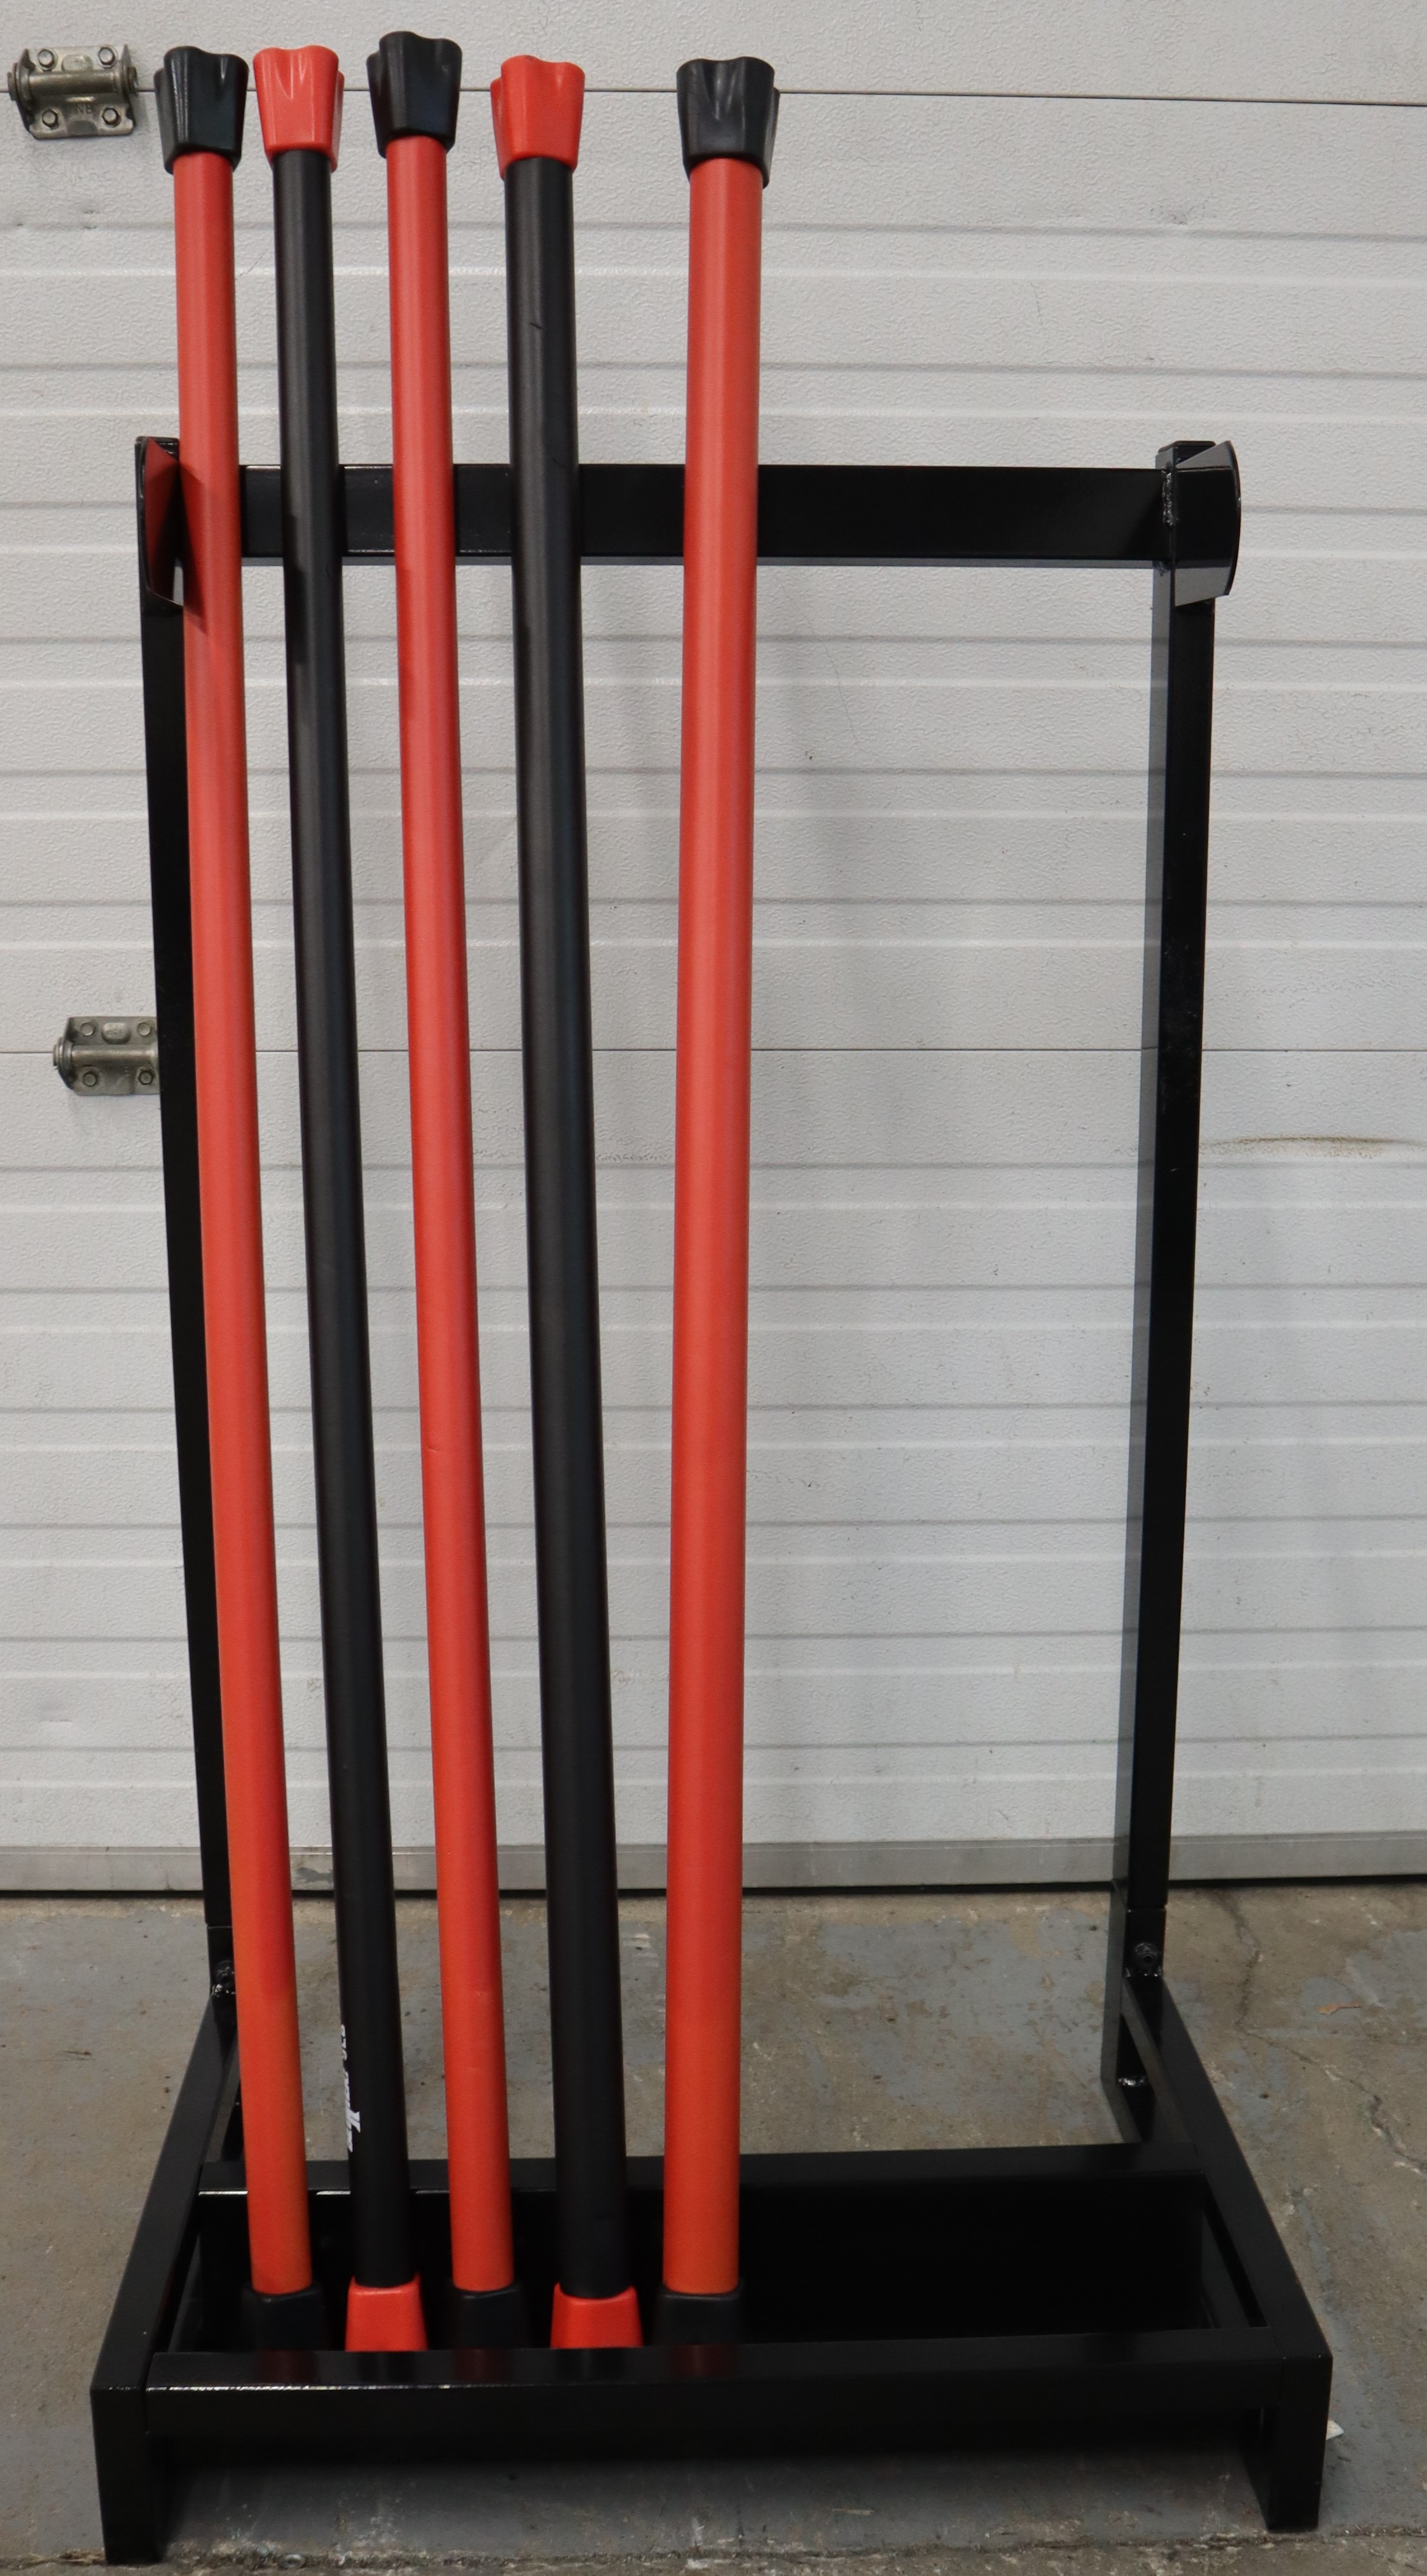 Used Perform Better Aerobic Weight Bars - Body Bars Set w Rack Freeweights & Accessories